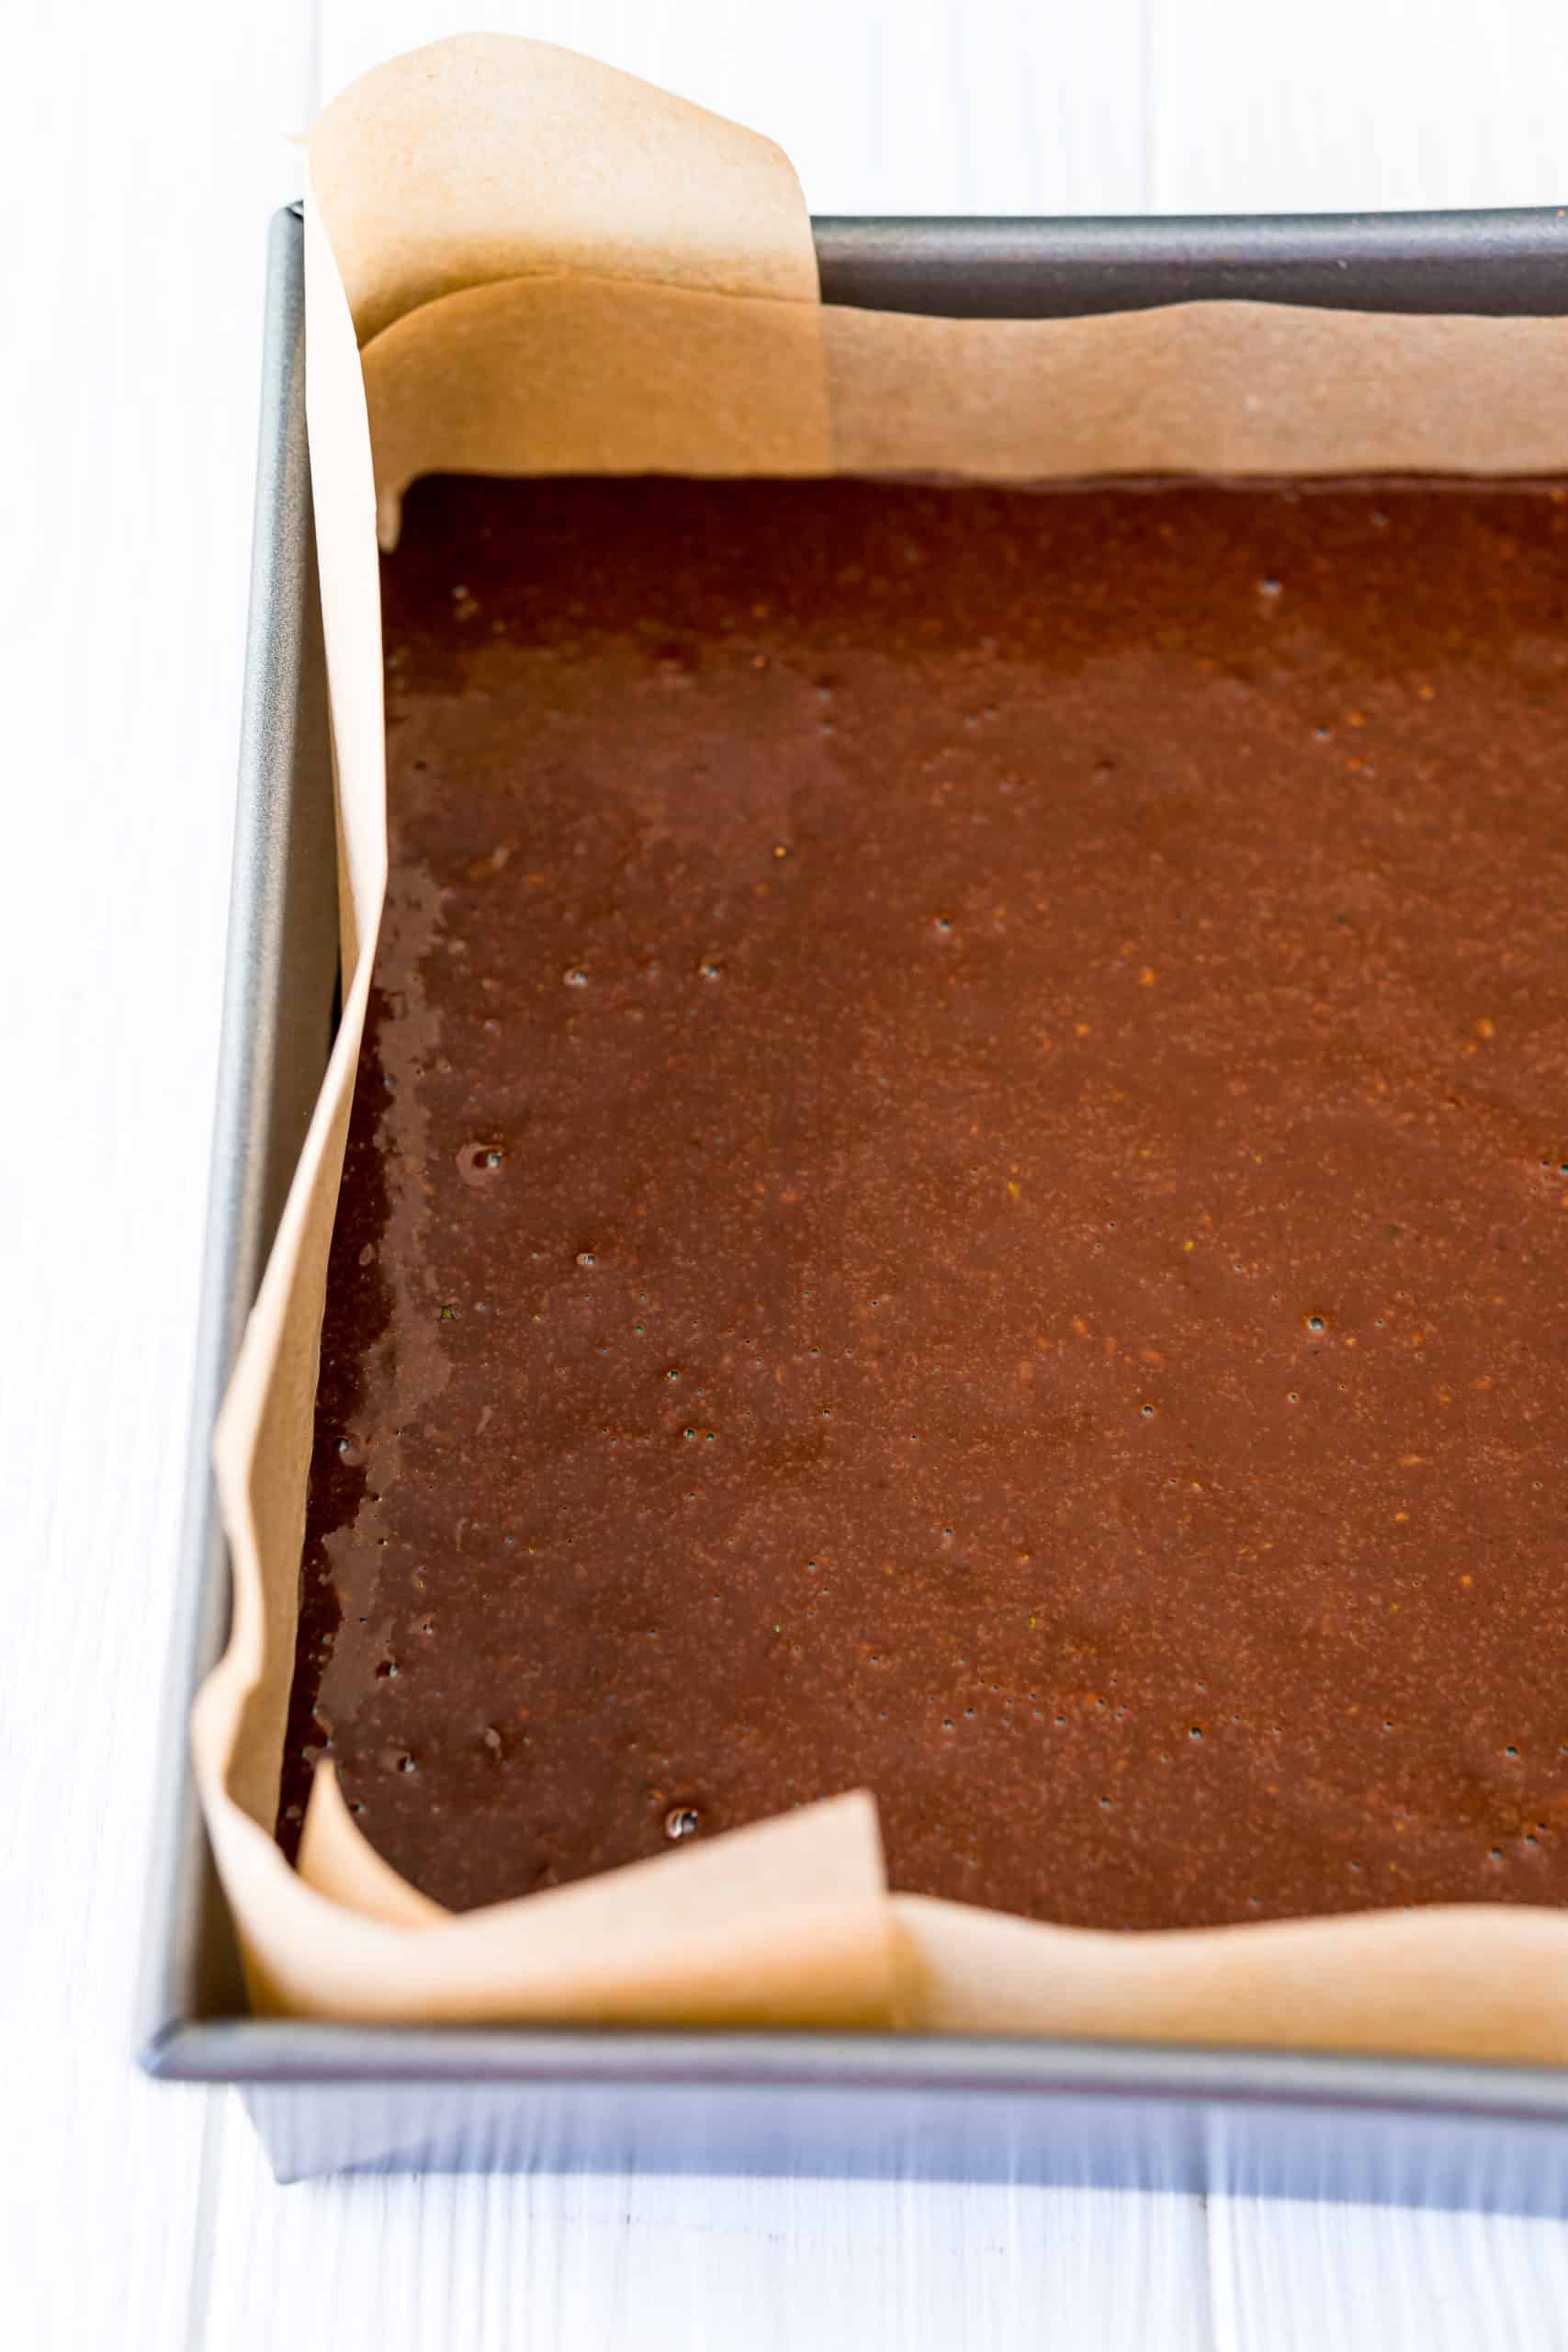 zucchini brownie batter poured into prepared baking dish with parchment paper.